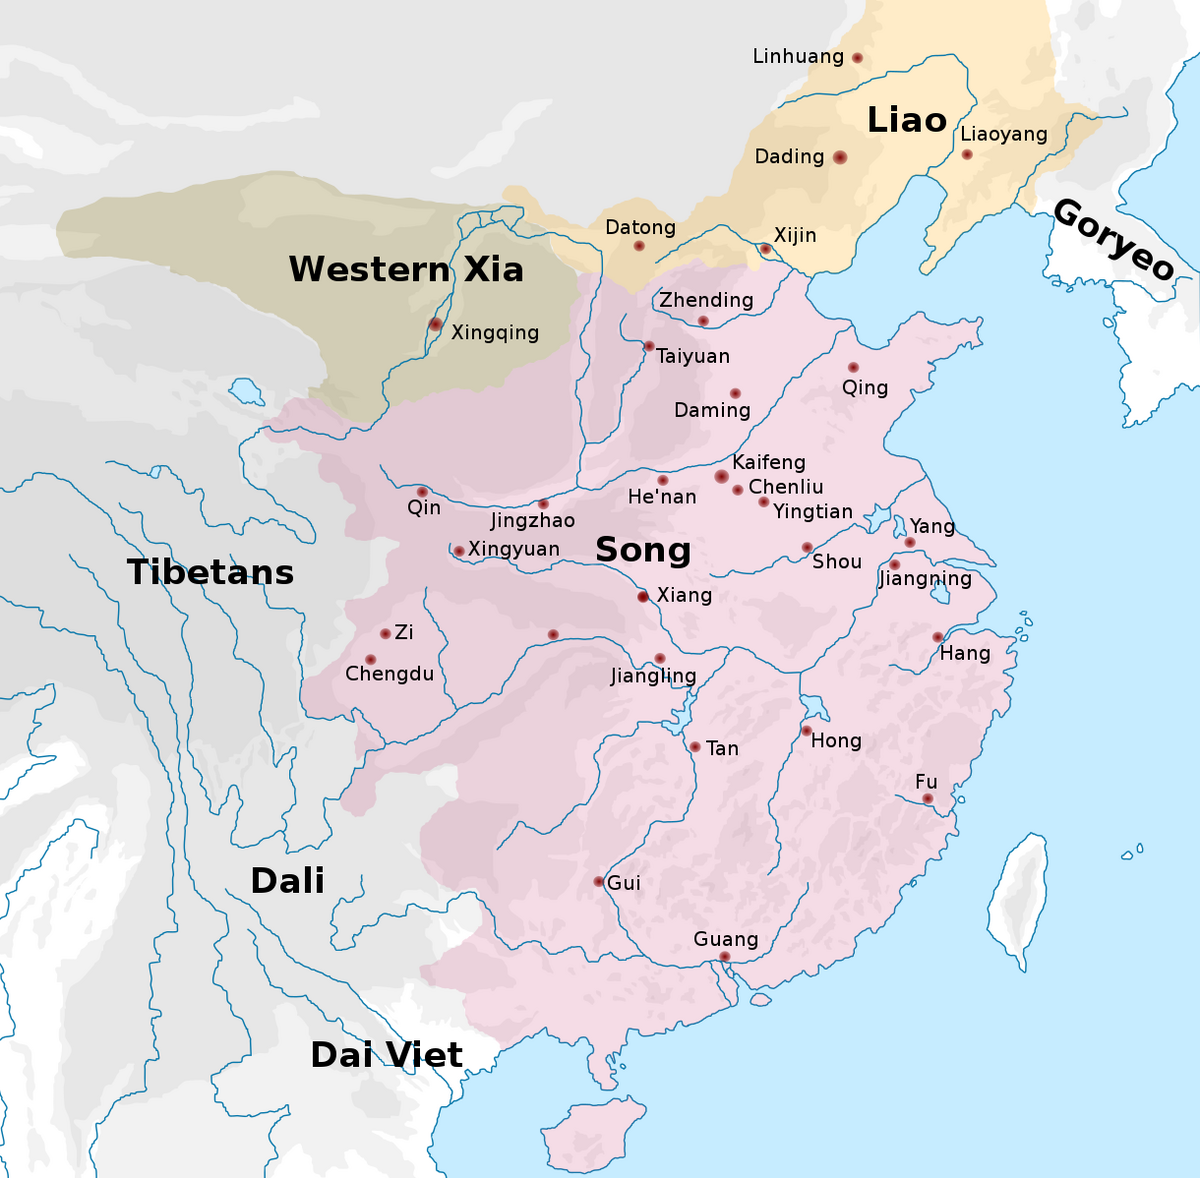 China during the Northern Song Dynasty